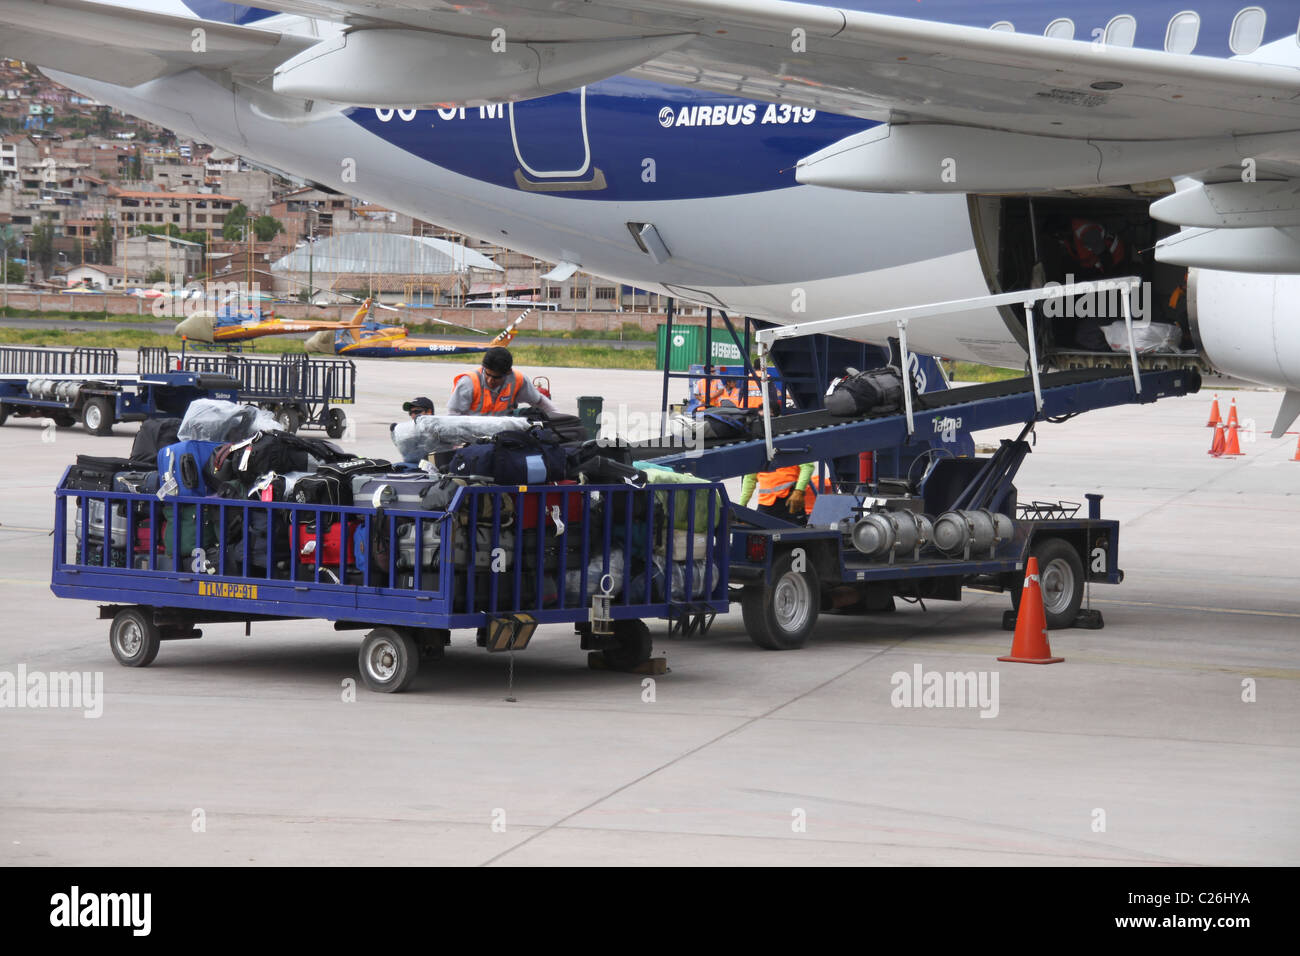 Baggage handlers at airport loading the luggage into the aircraft belly Stock Photo